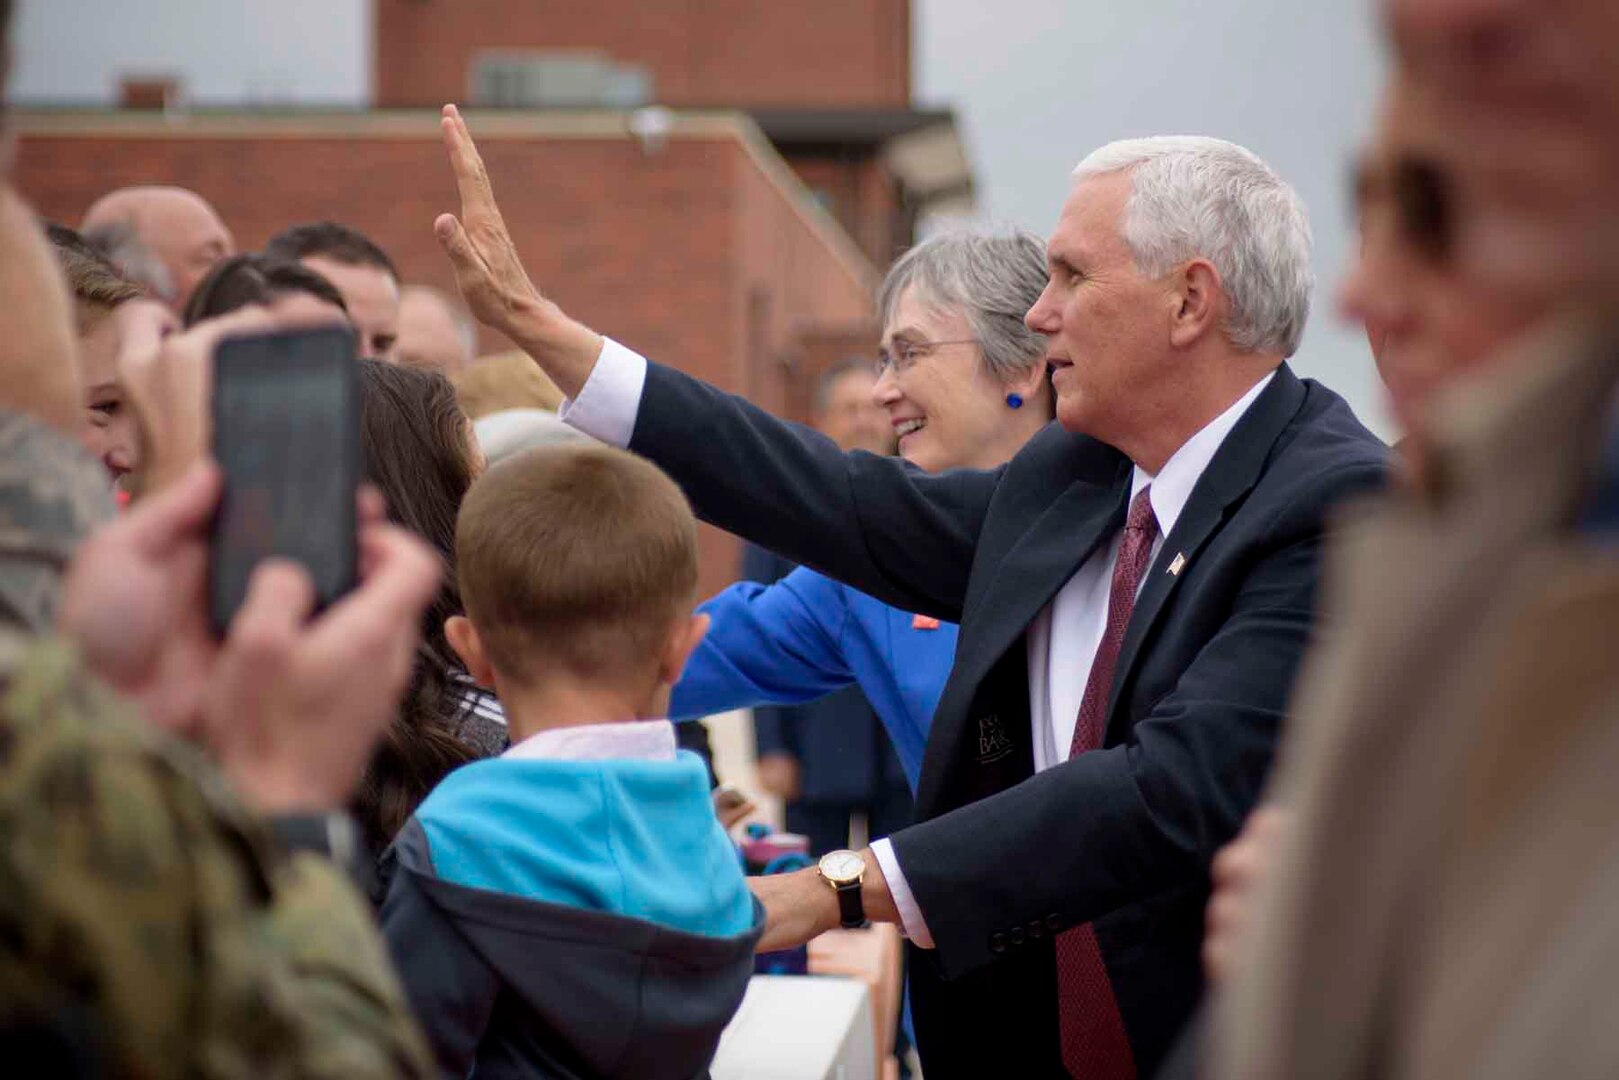 PETERSON AIR FORCE BASE, Colo. - Vice President Mike Pence alongside the Secretary of the Air Force Heather Wilson greet service members and families at Peterson Air Force Base, Colo., June 23, 2017. As vice president, this
was Pence's first official visit to Colorado Springs, Colo. (U.S. Air Force photo by Senior Airman Dennis Hoffman)

 
